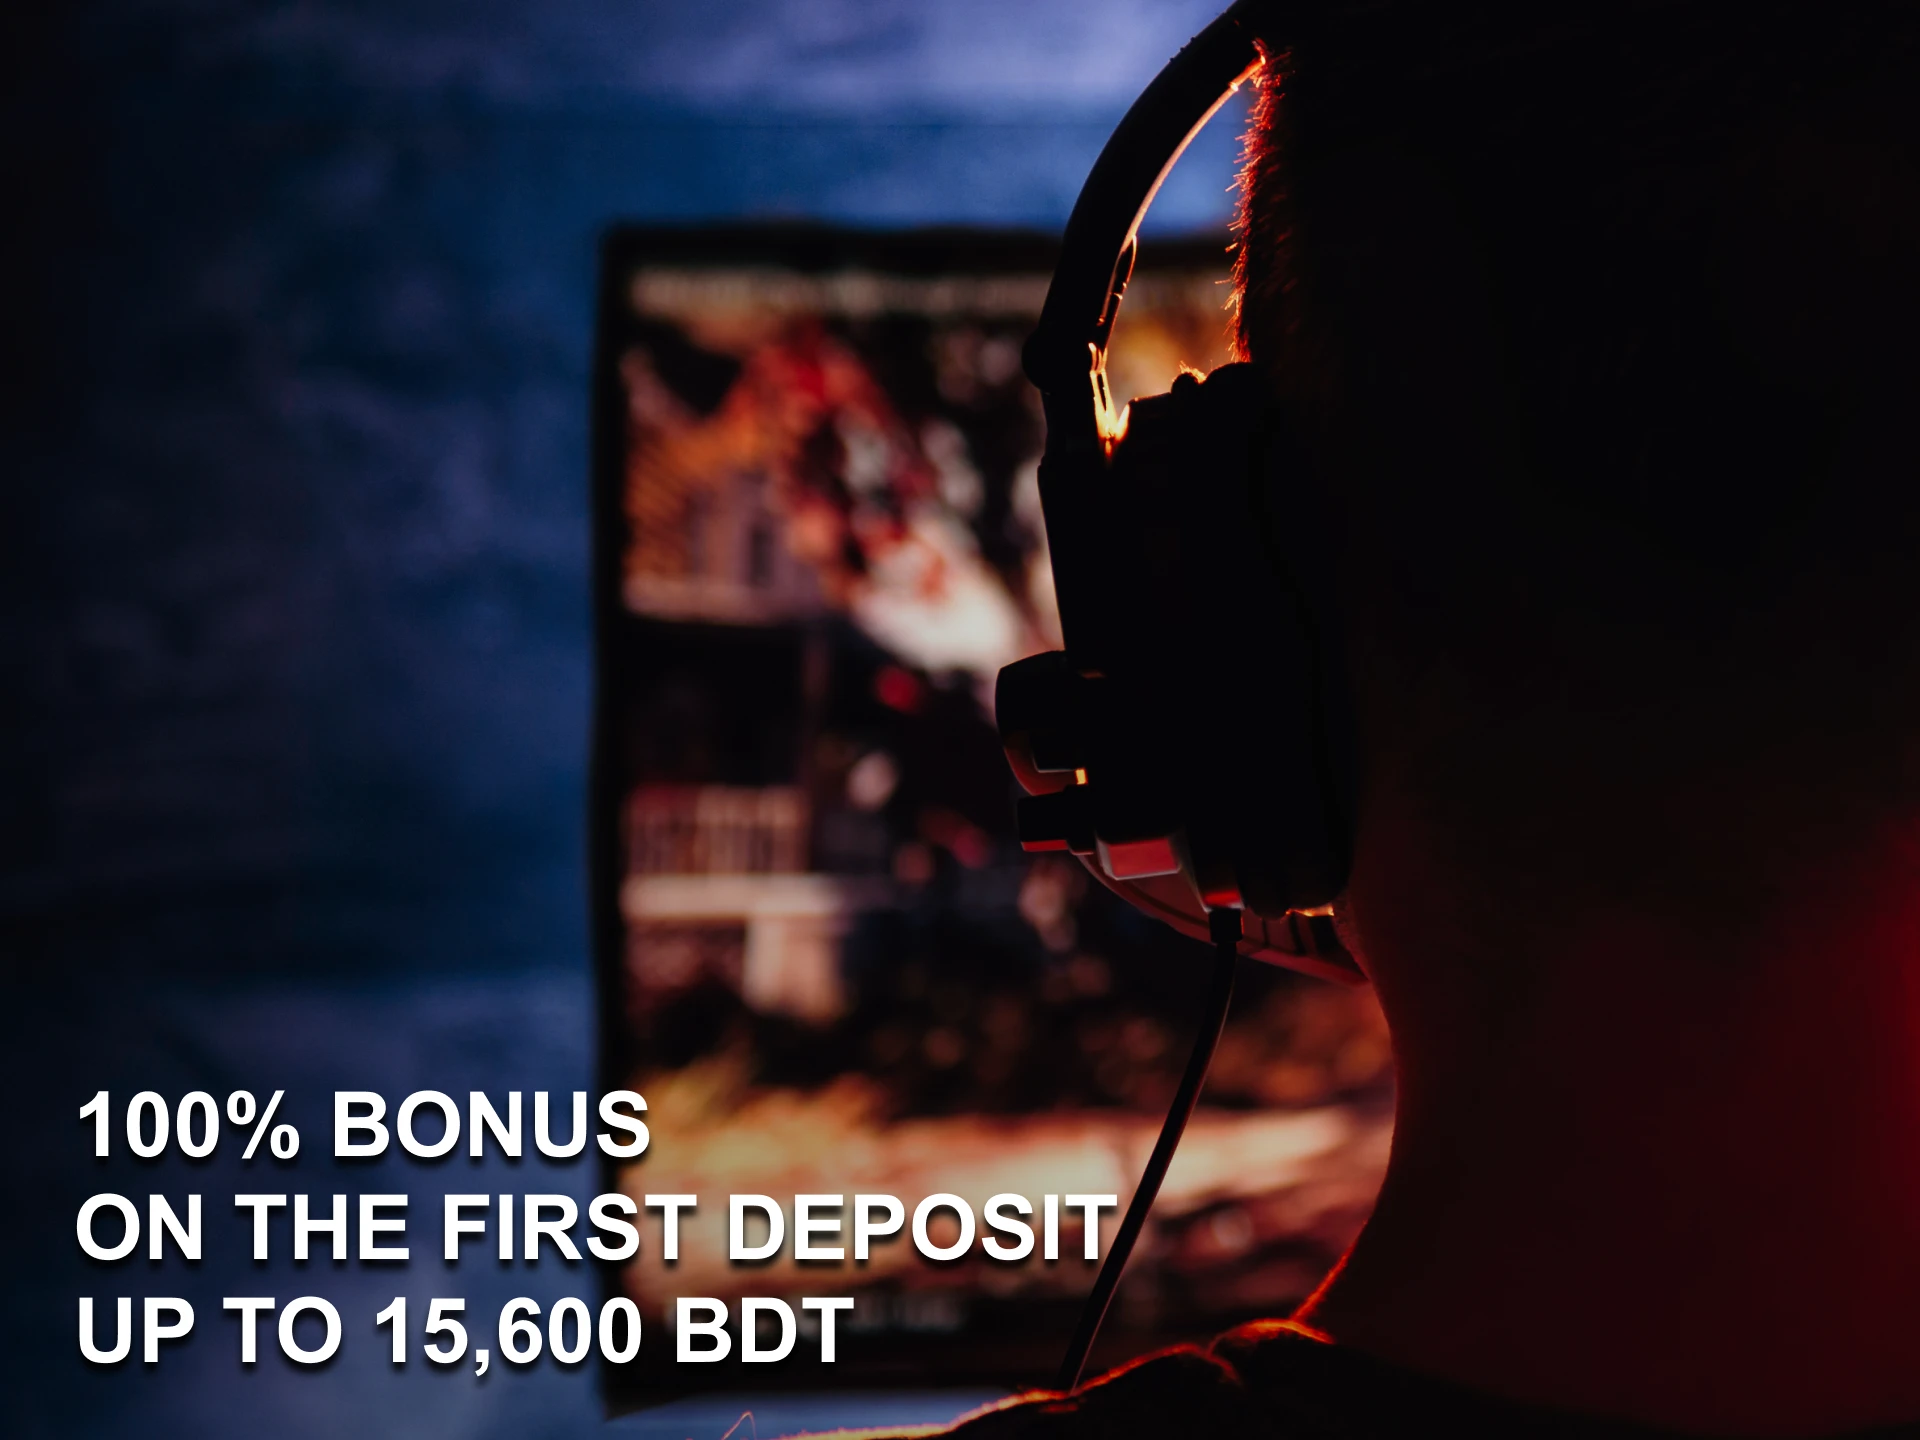 For new users, there is a special bonus on the first deposit.